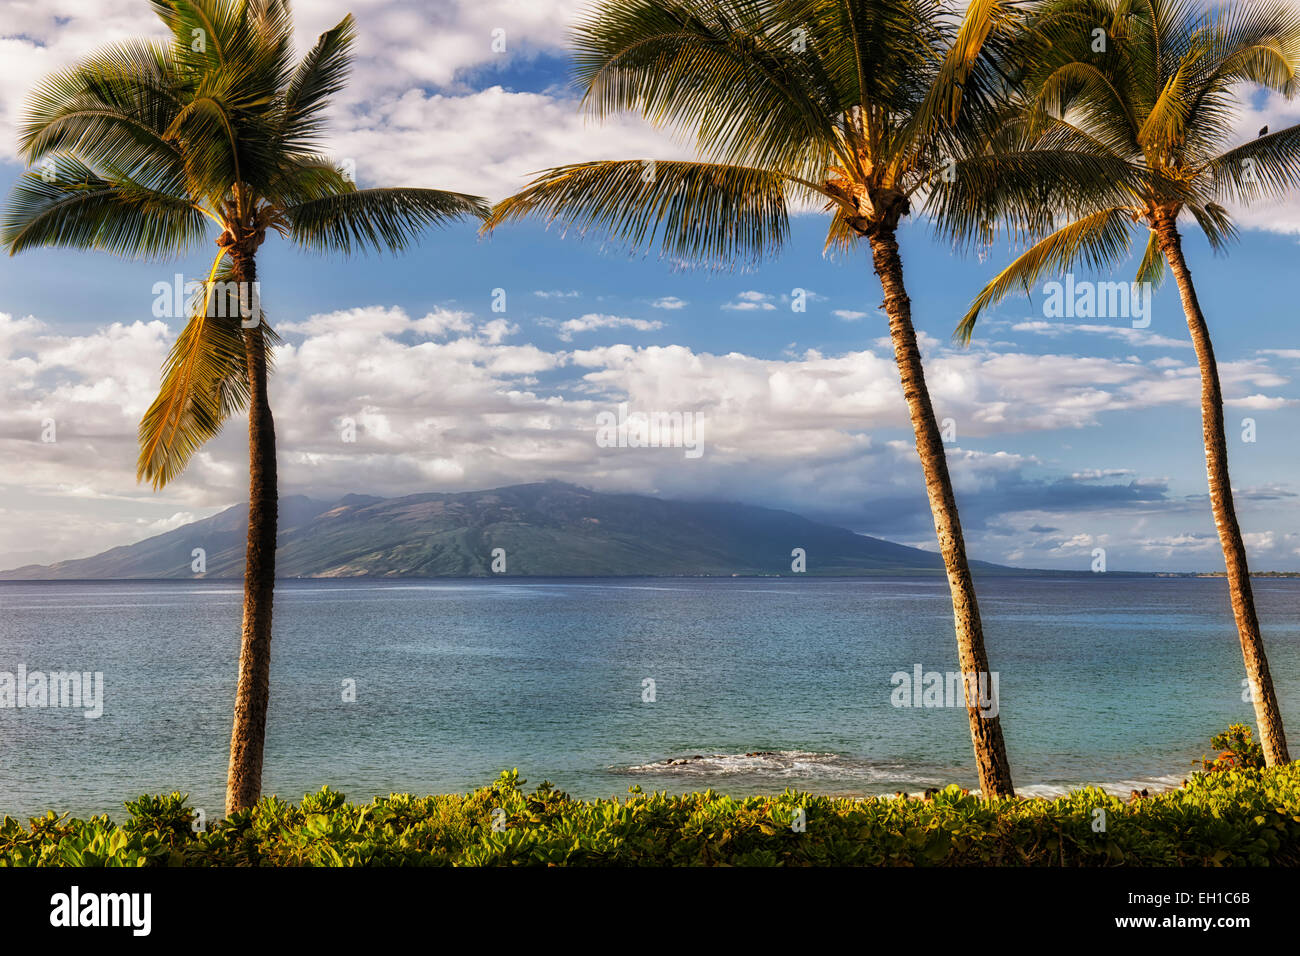 Late afternoon clouds build over the West Maui Mountains from Makena Point on Hawaii’s island of Maui. Stock Photo